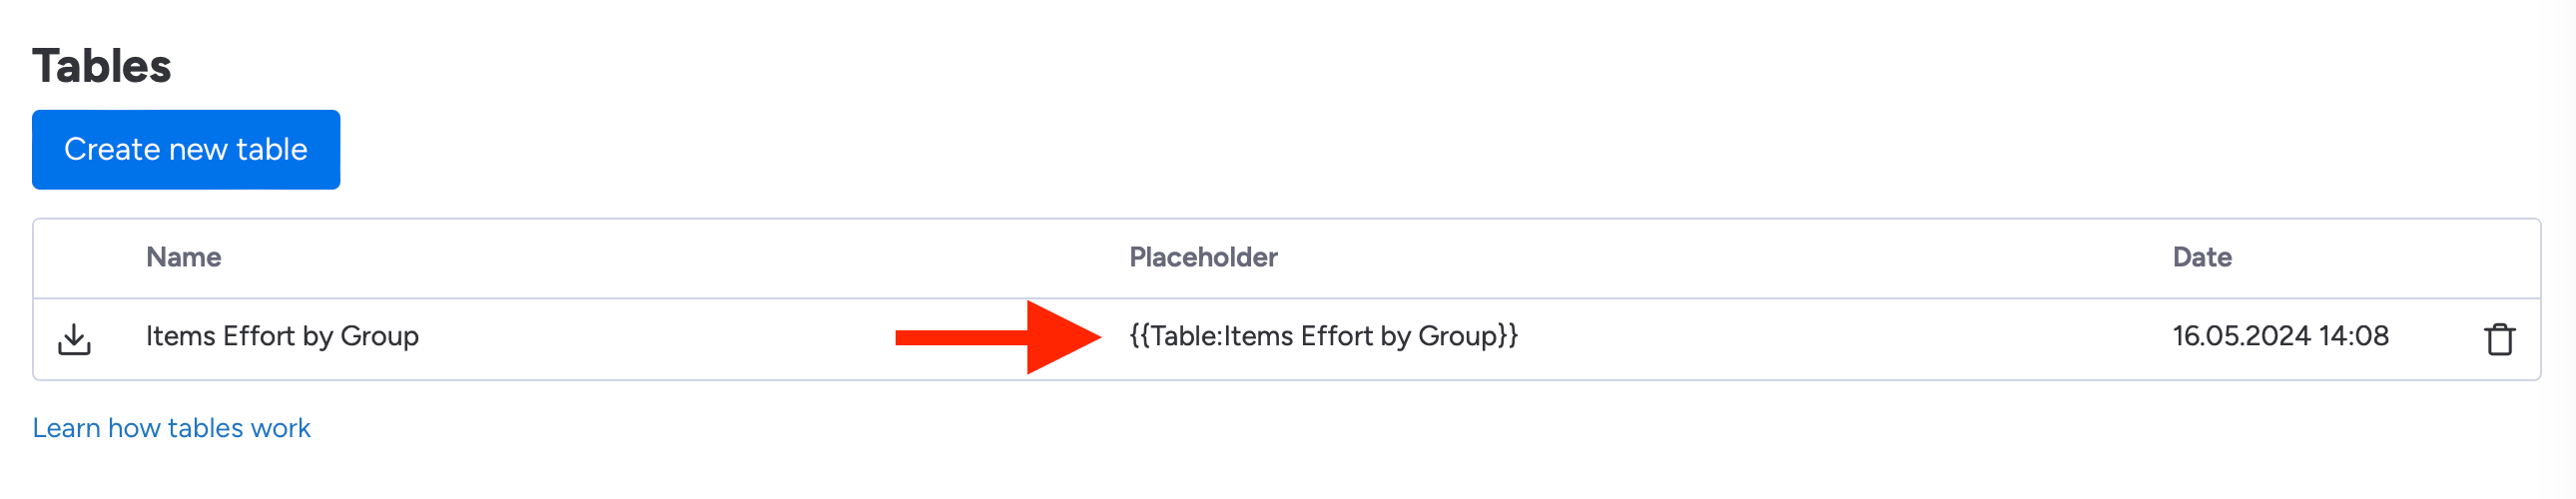 DocExport Tables Placeholder